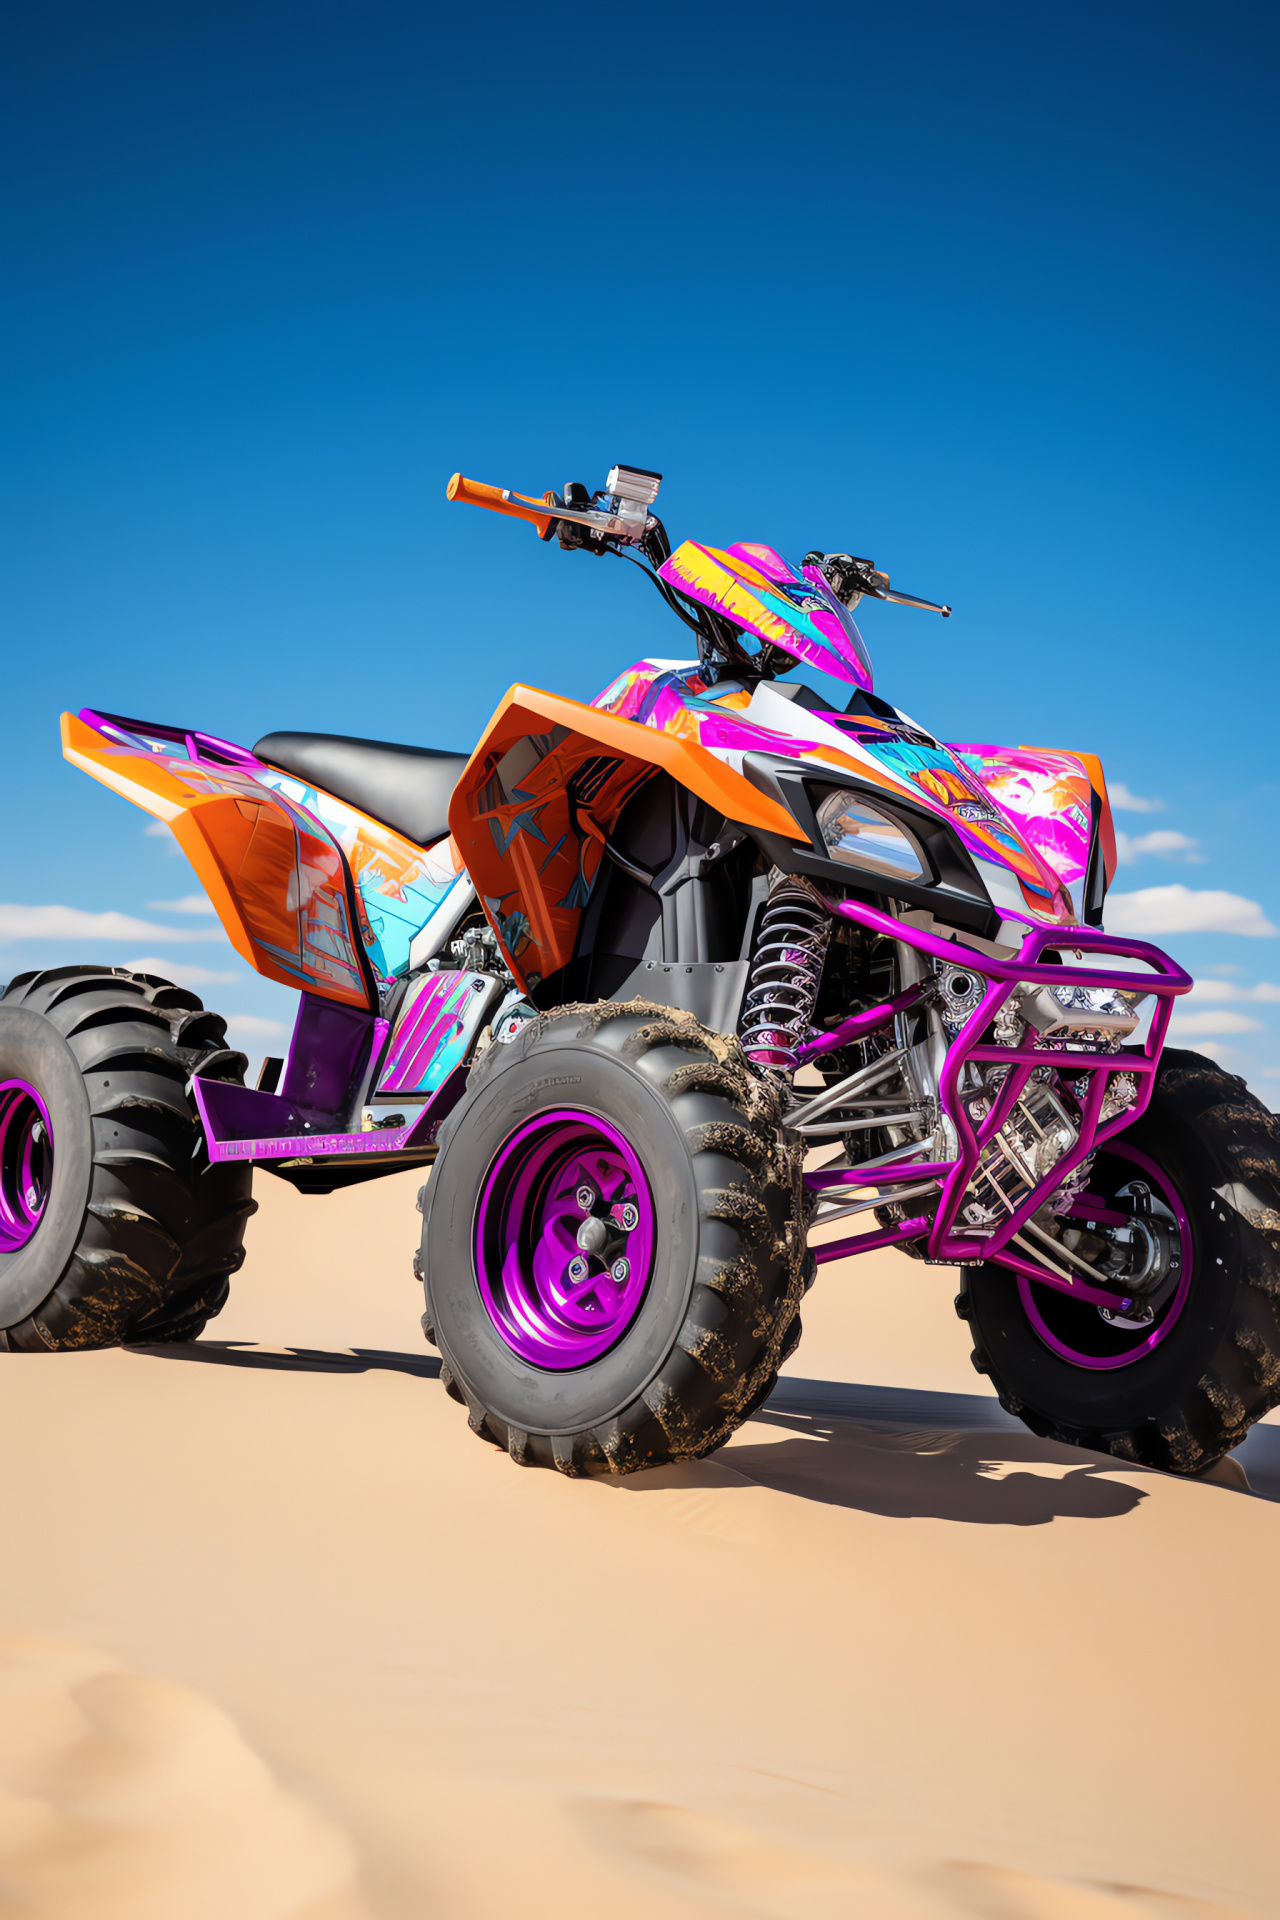 Special Edition Raptor 700SE, Glamis Dunes outing, Neon visual accents, Custom graphic detailing, Desert performance, HD Phone Wallpaper